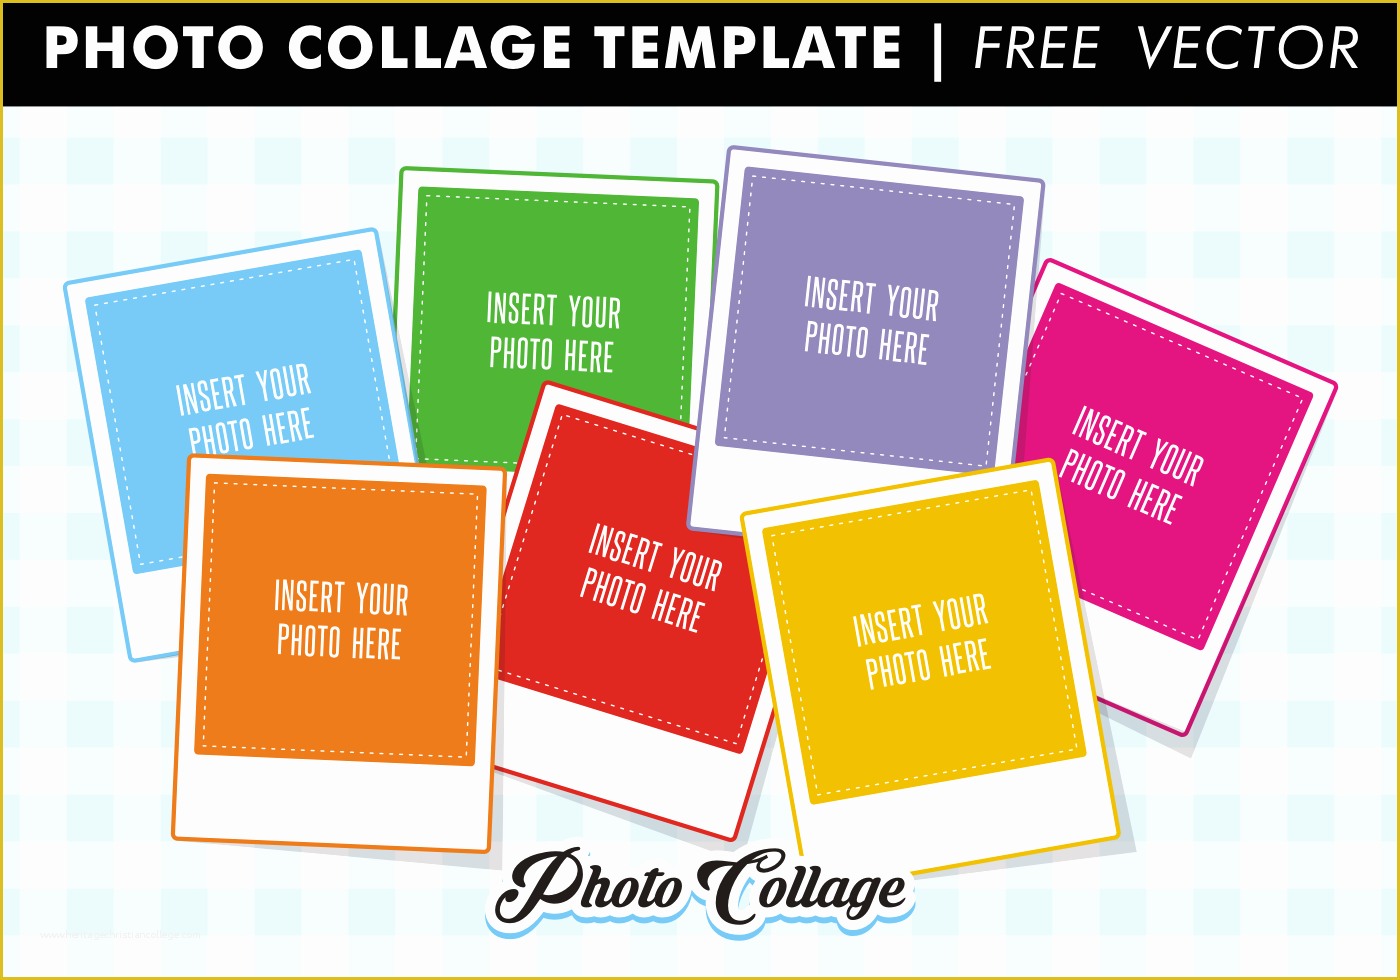 Photography Templates Free Of Collage Templates Free Vector Download Free Vector